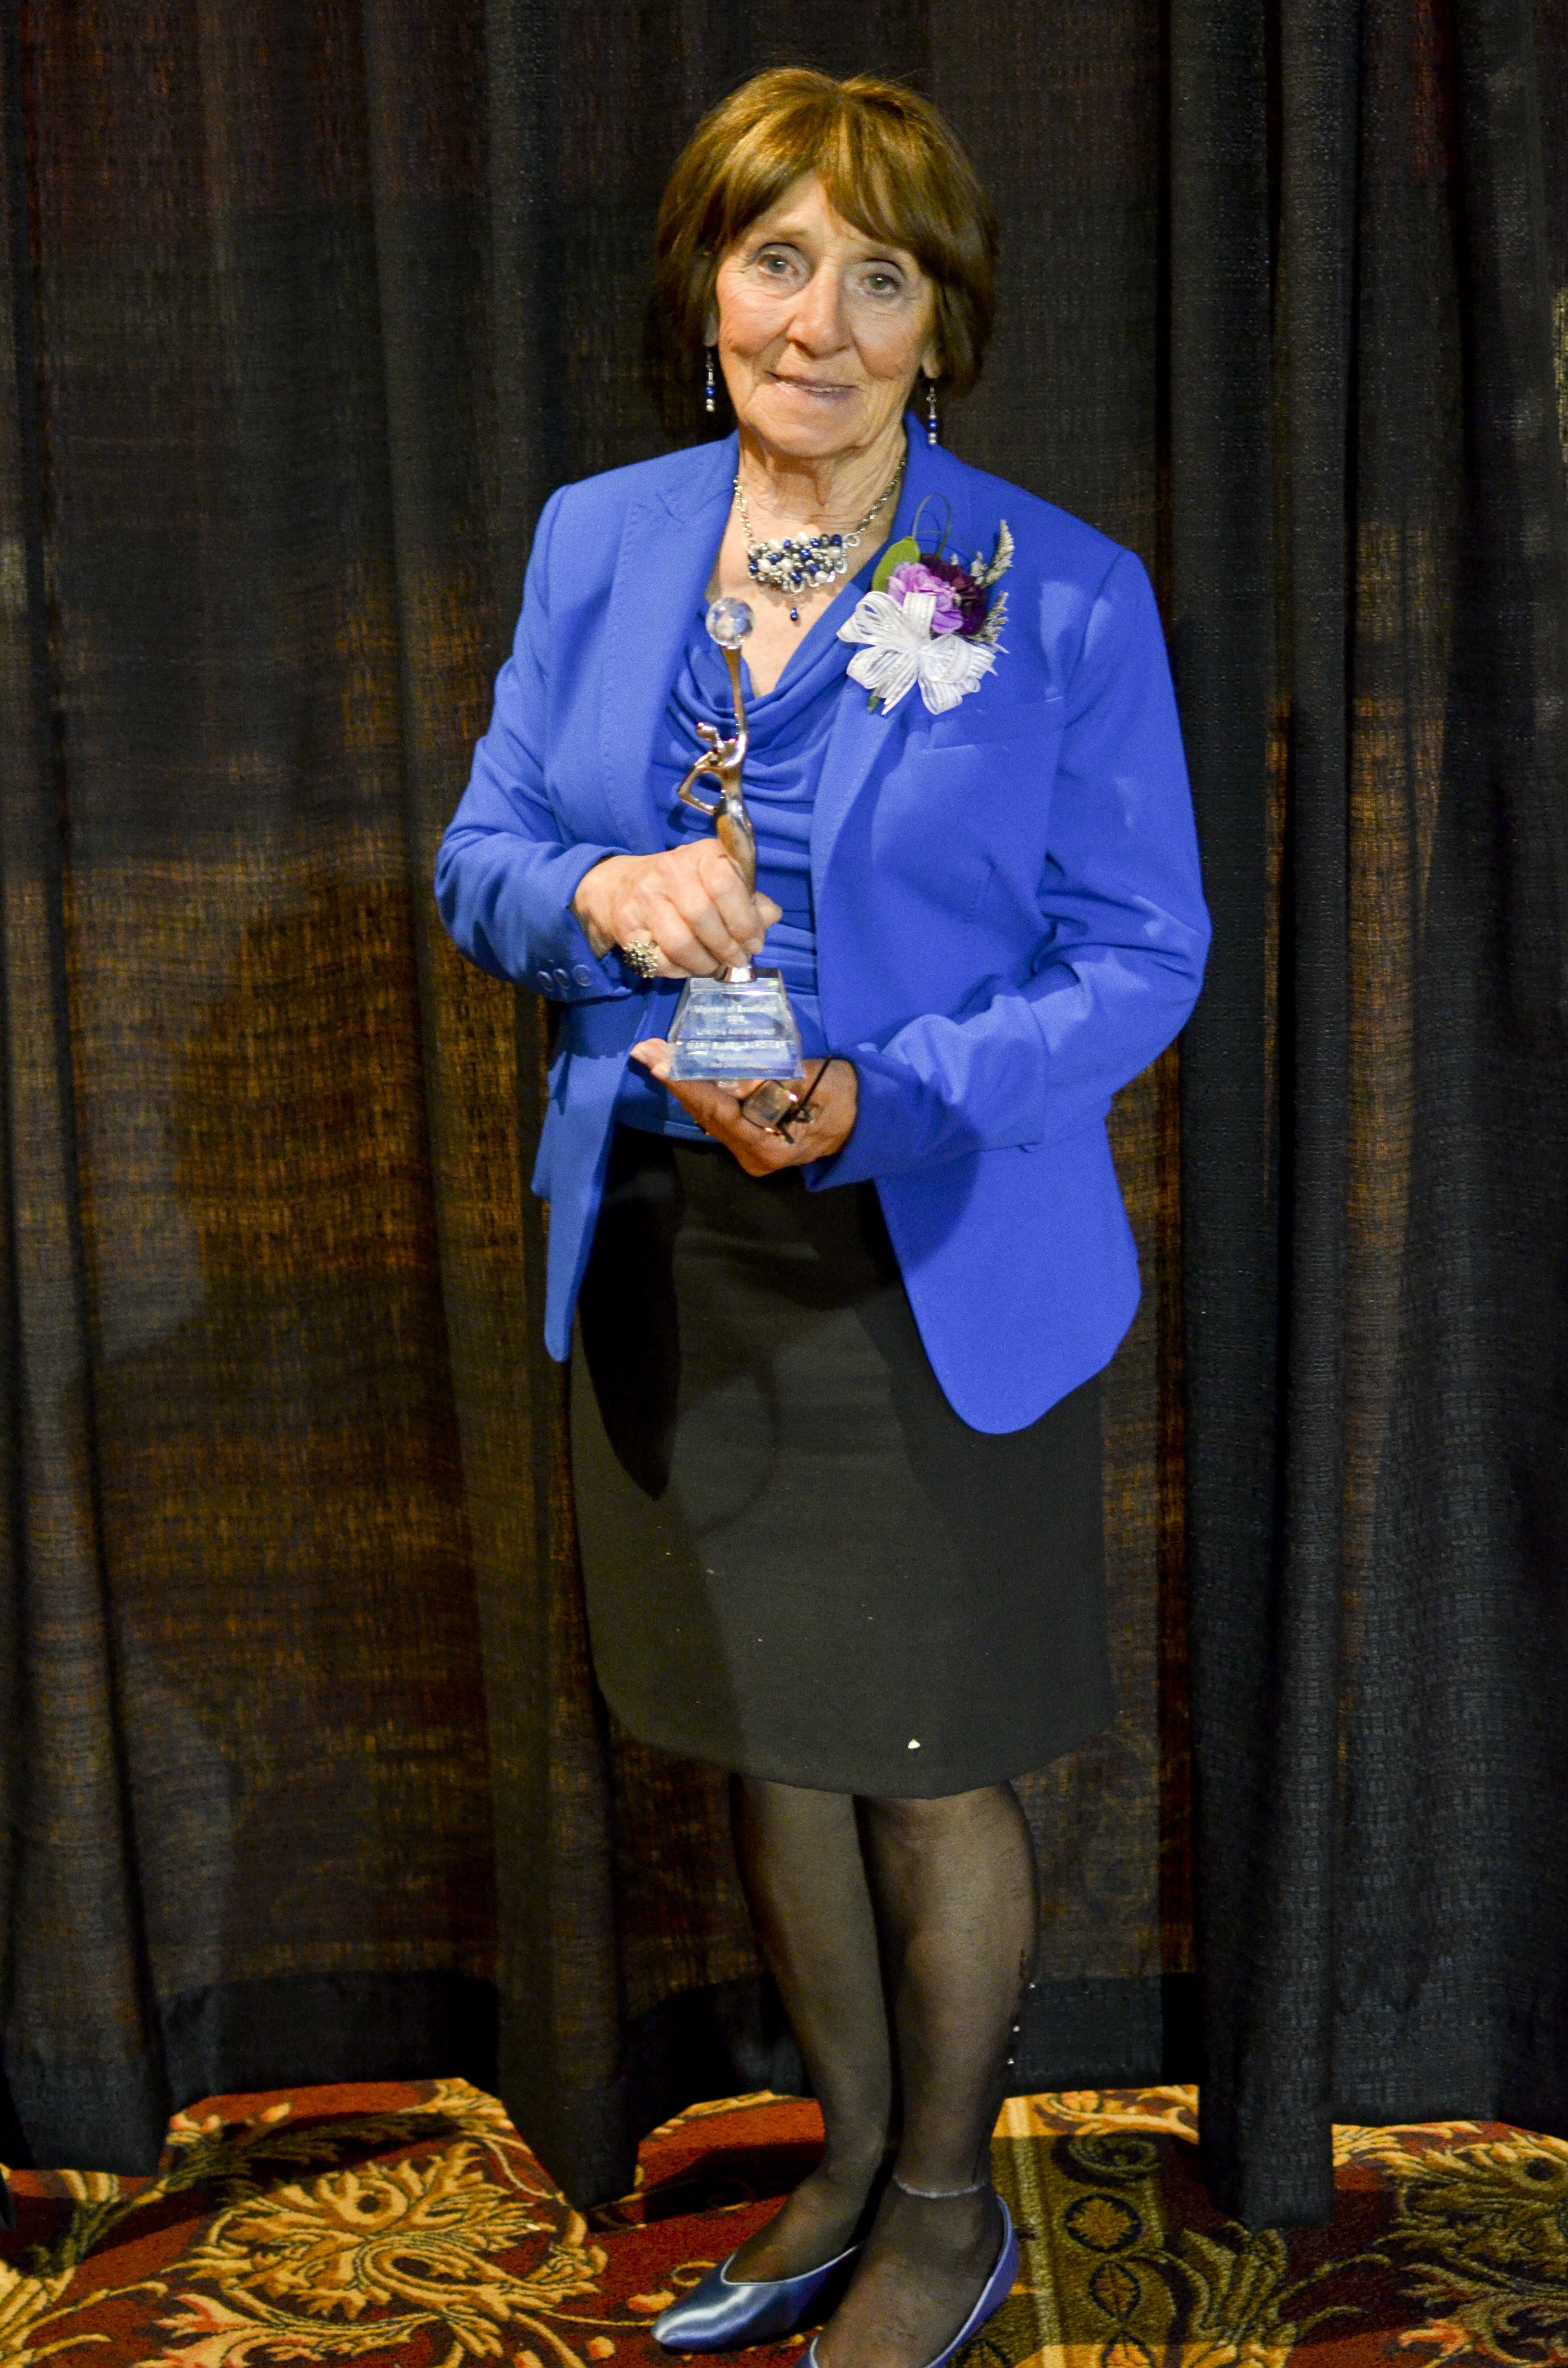 TOP HONOUR – Mary Eileen Gardiner was given the Lifetime Achievement Award at this year’s Women of Excellence Awards Gala.